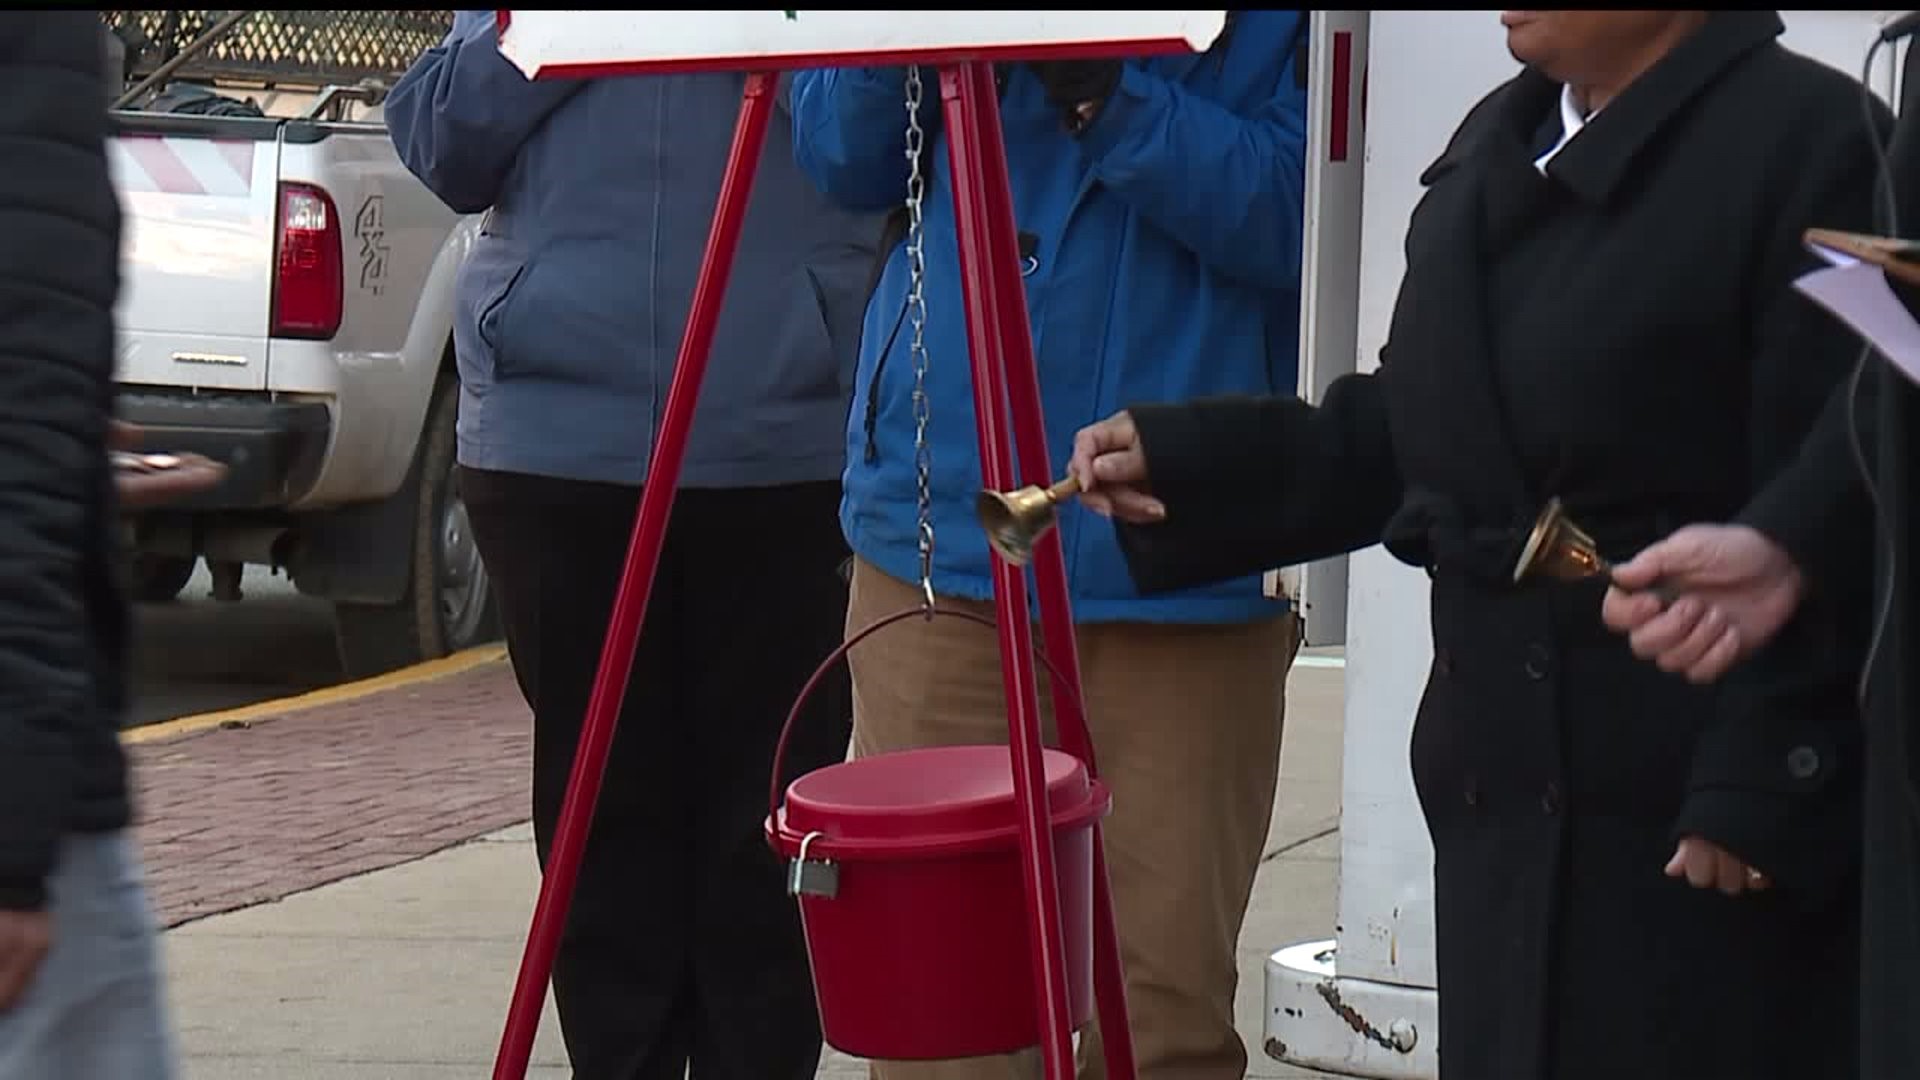 Fox43 is ringing the bell for the Salvation Army`s Red Kettle campaign today at the Walmart Supercenter in Manchester Township